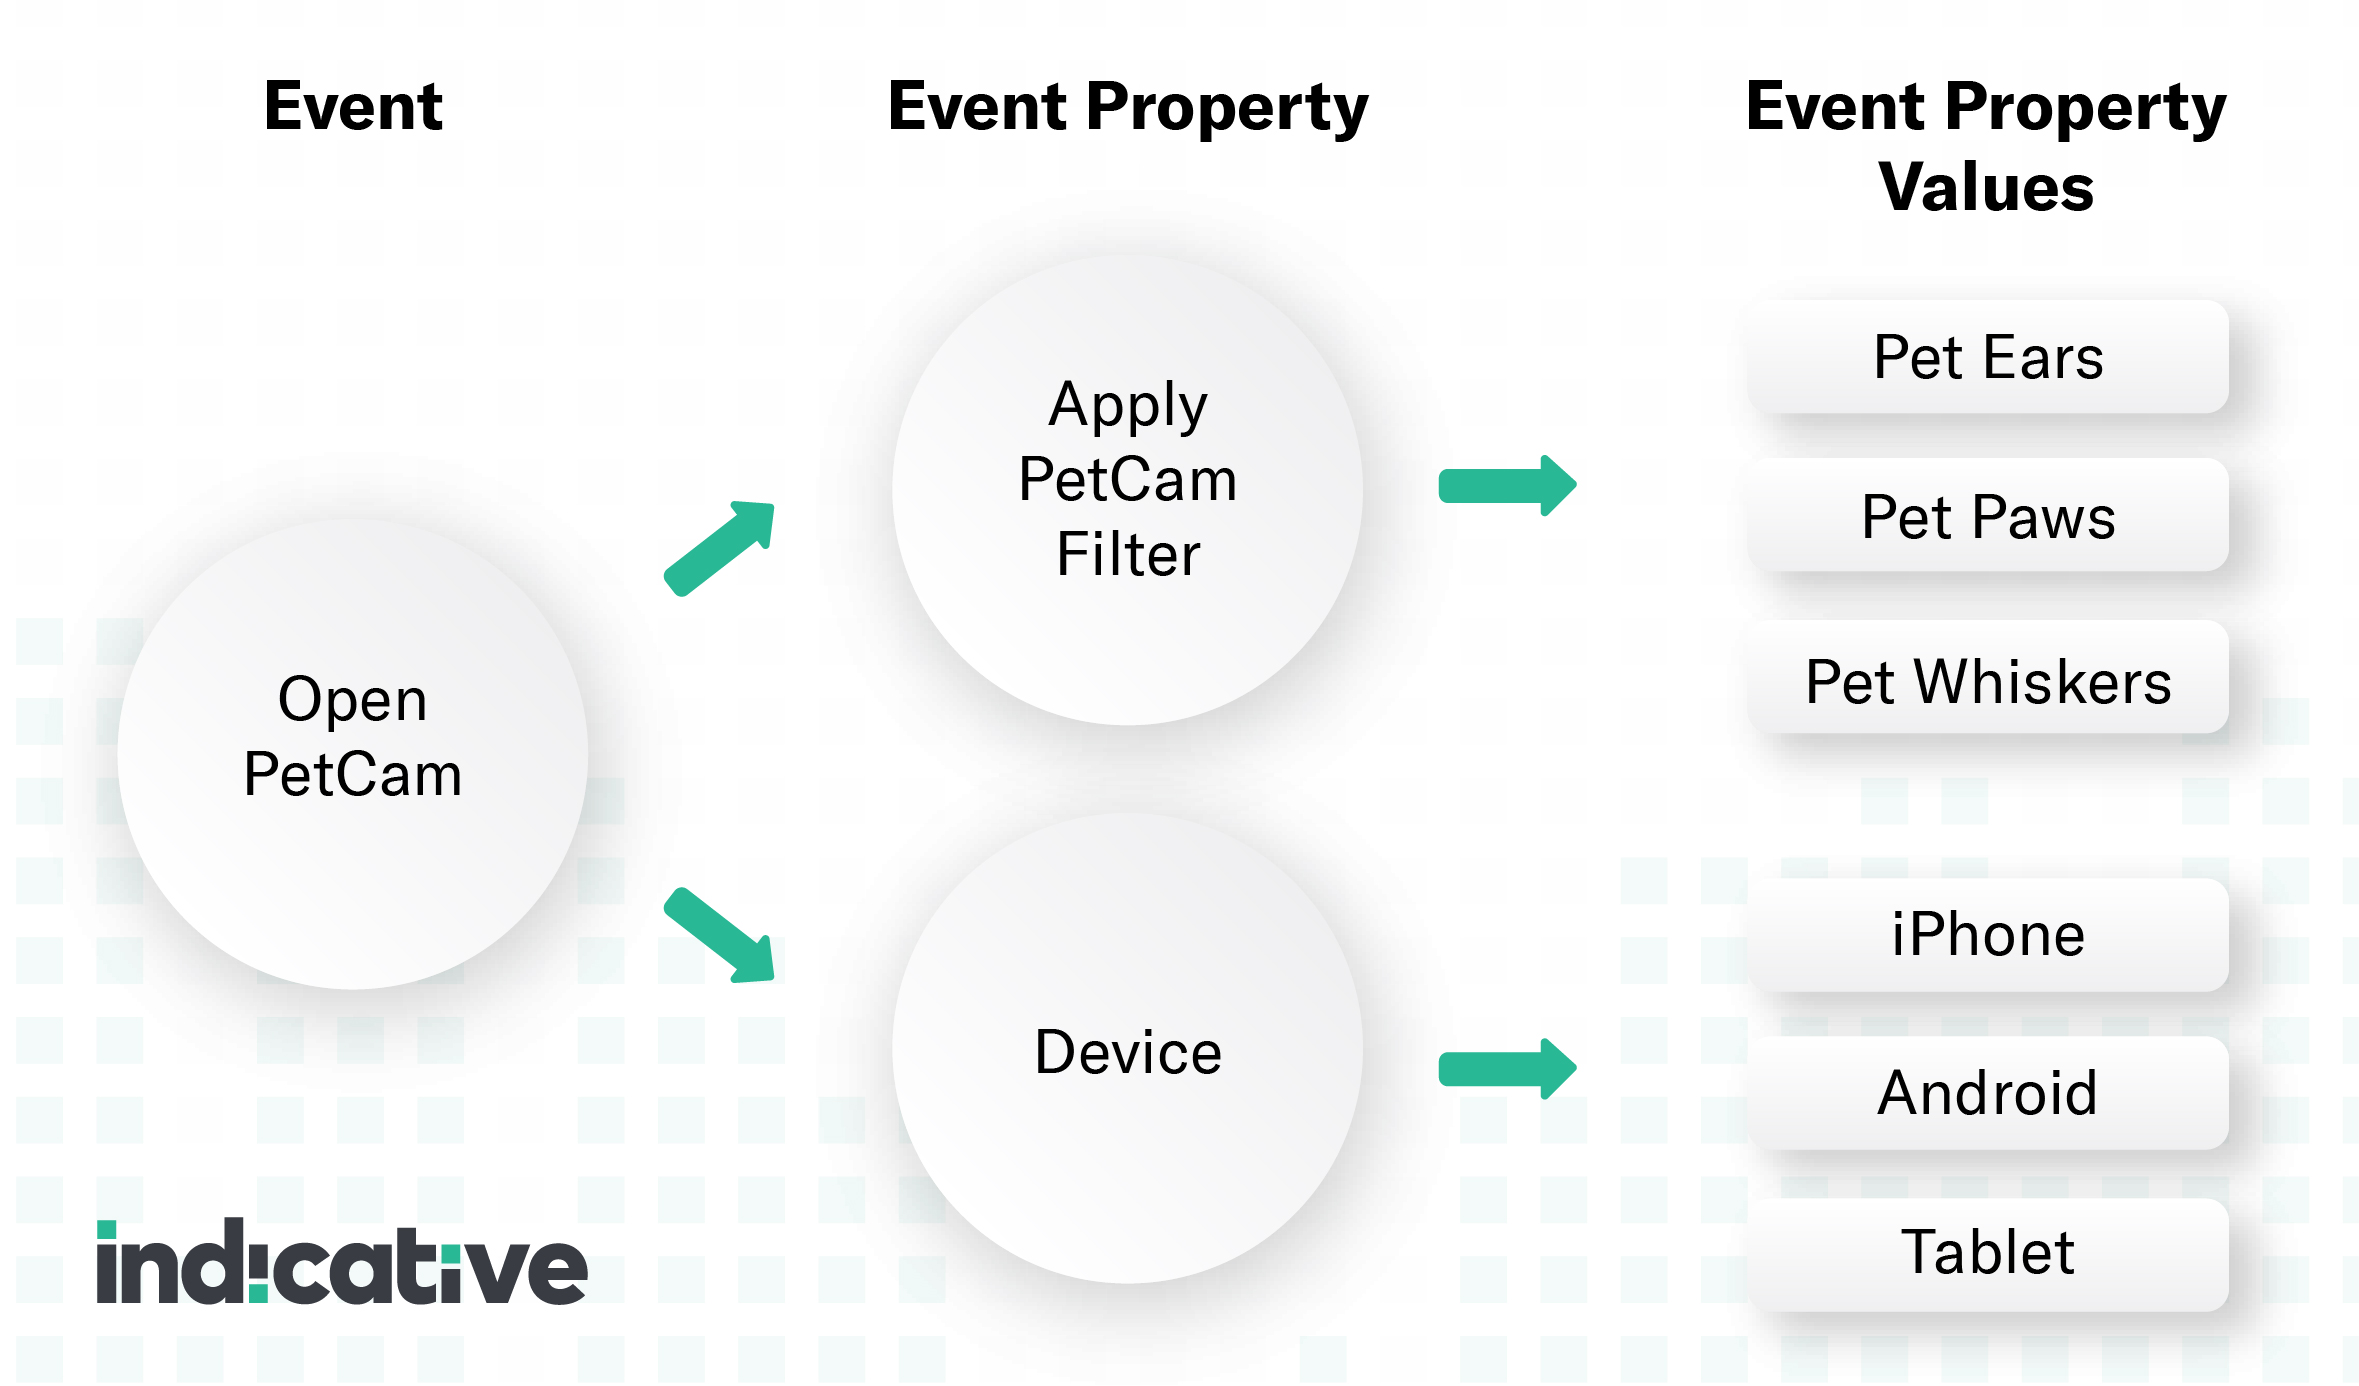 mapping events and event properties